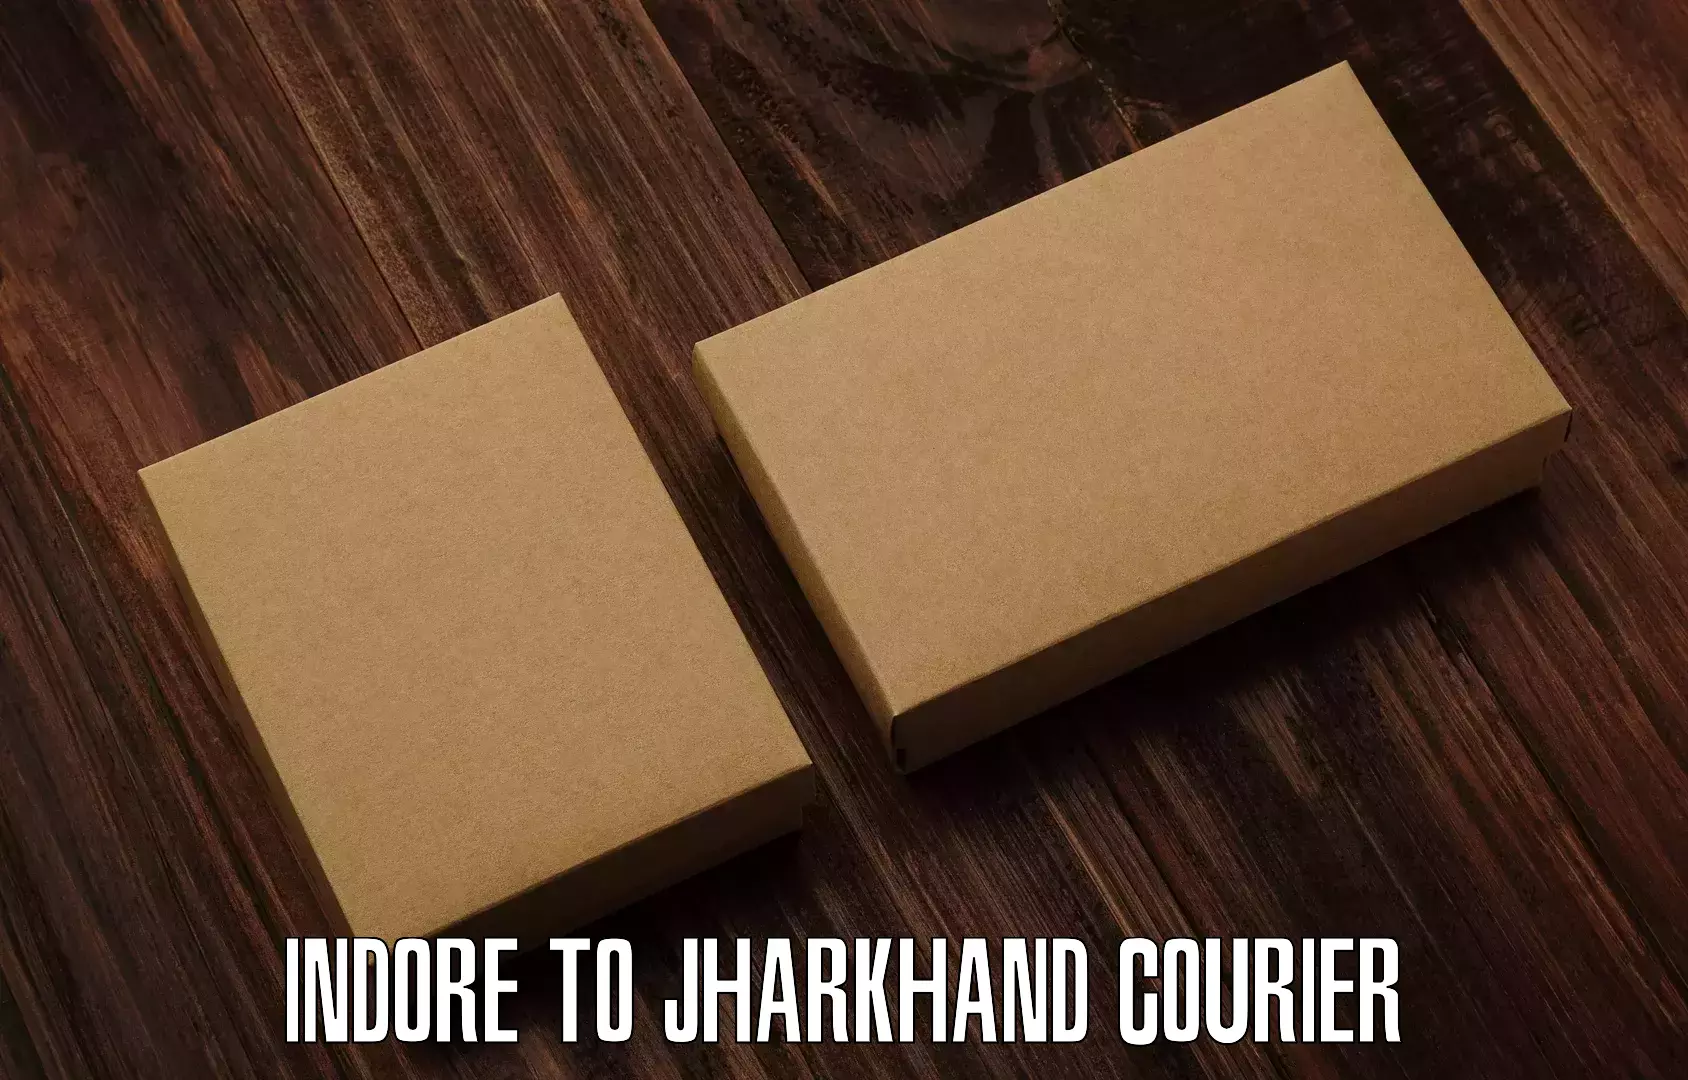 On-call courier service Indore to Jamshedpur